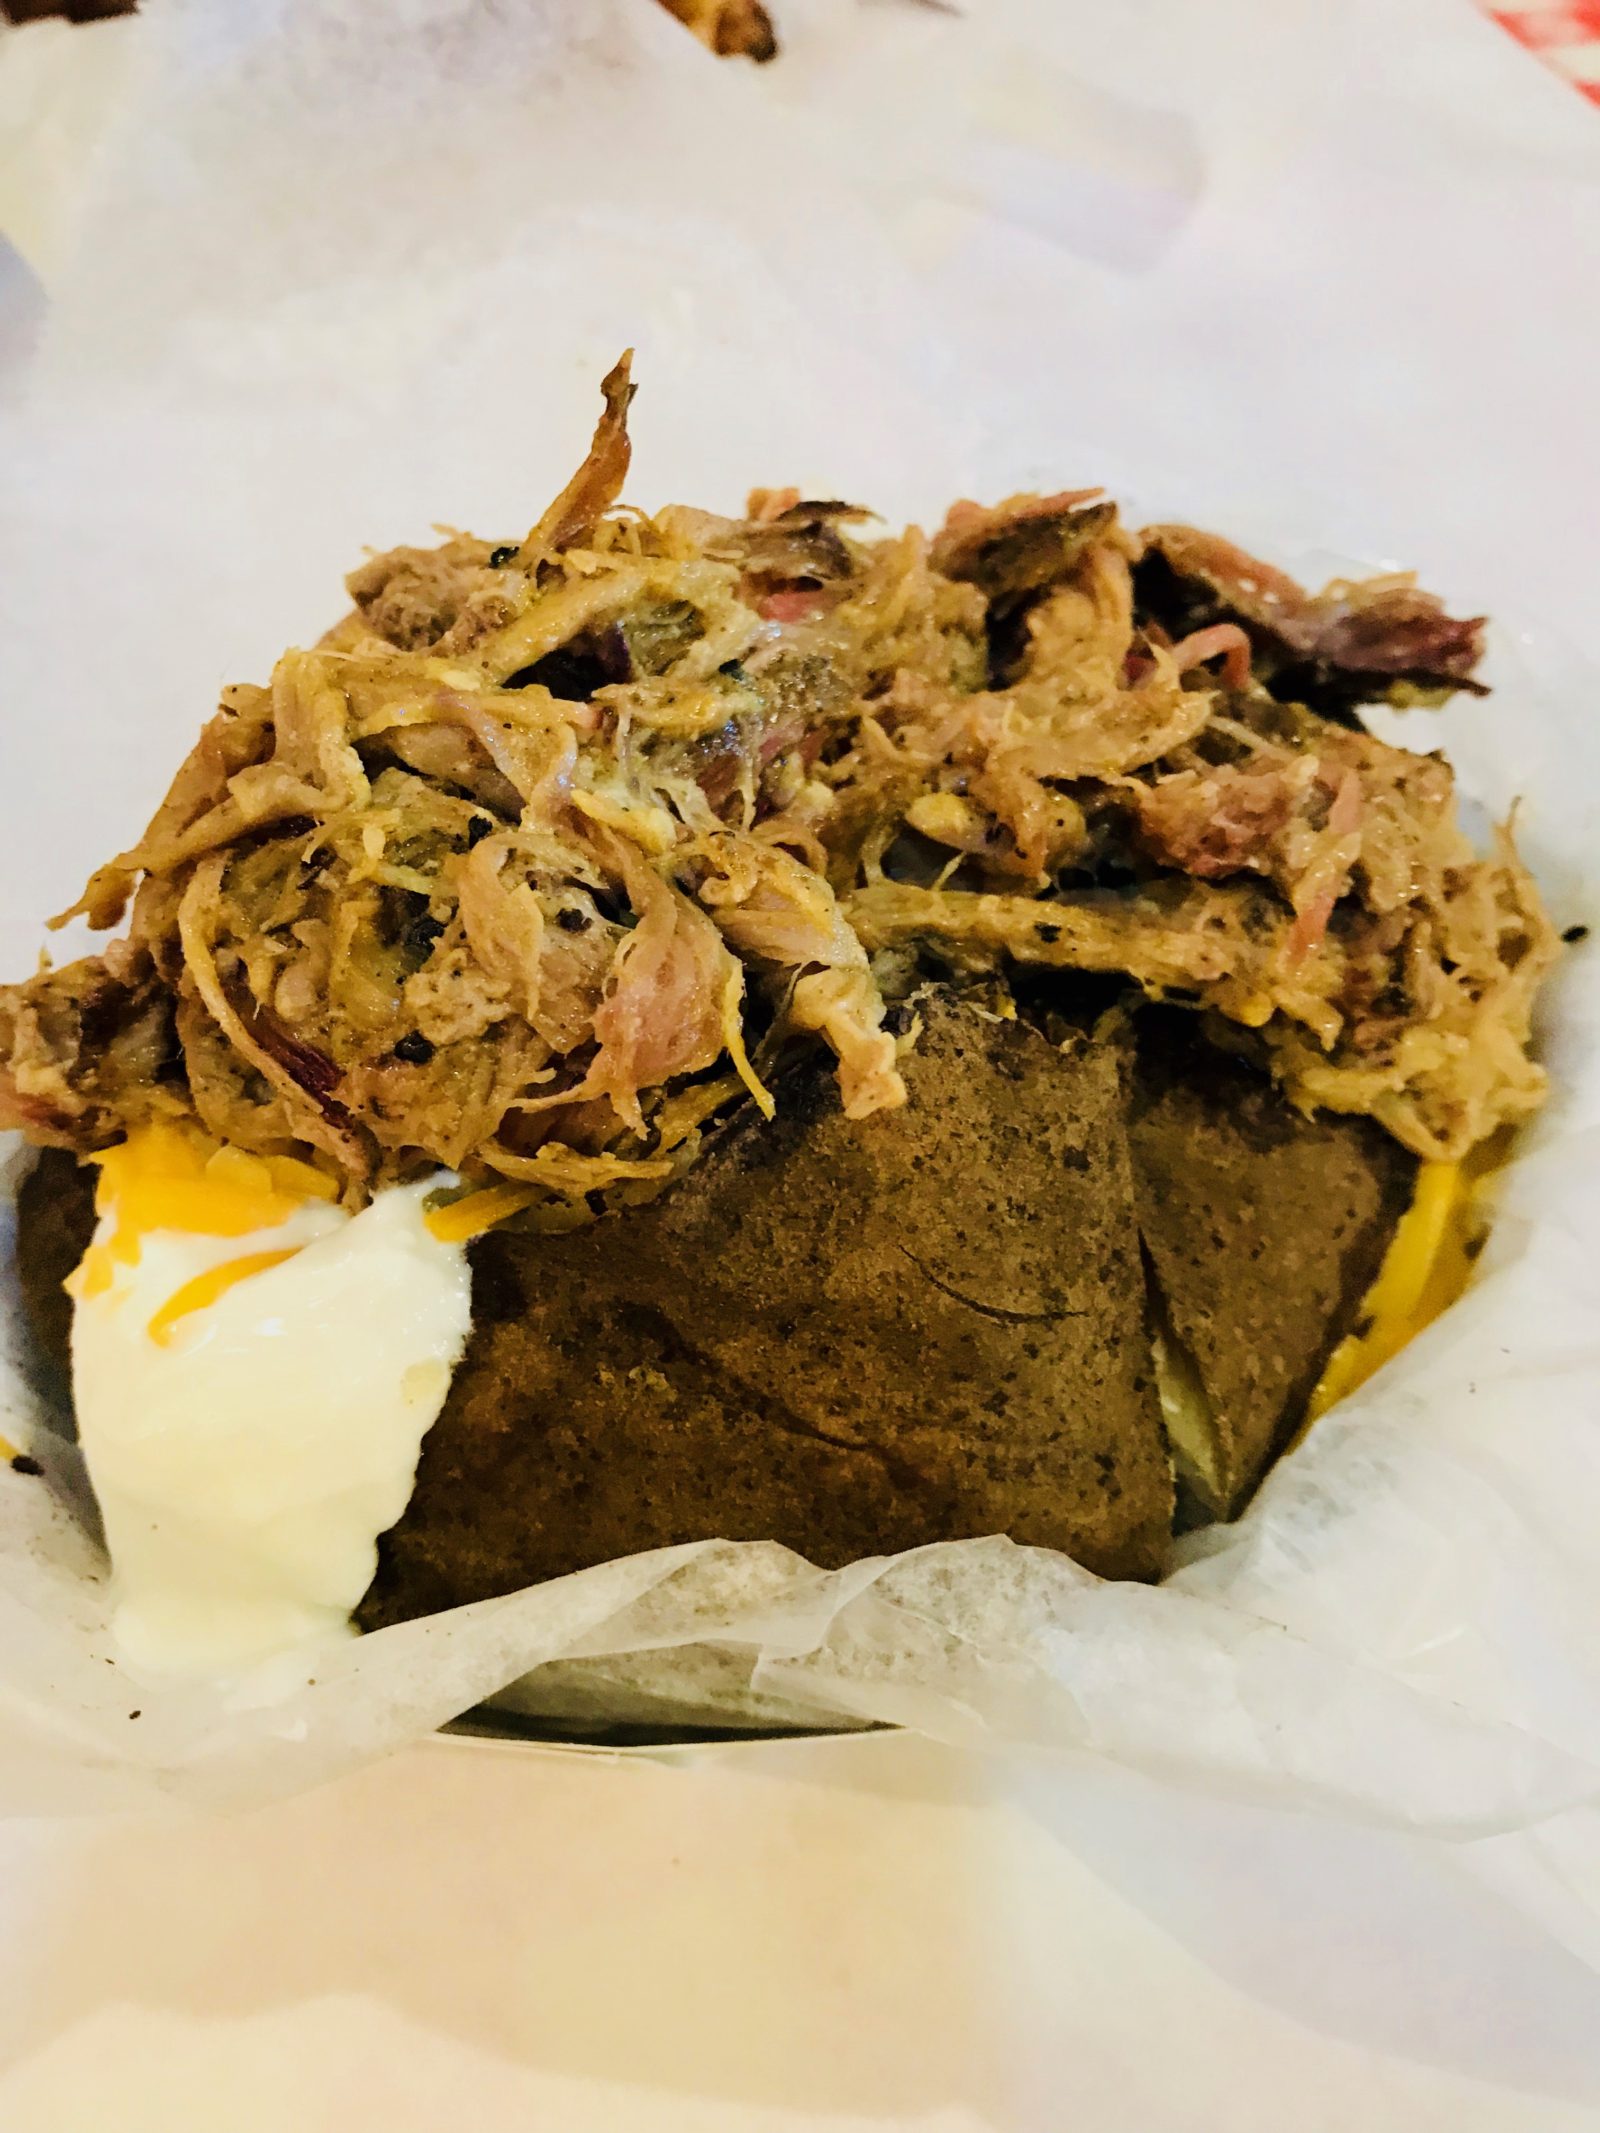 Pick of the Week - Rudy's Country Store and BBQ - Jumbo Smoked Baked Potato with Pulled Pork